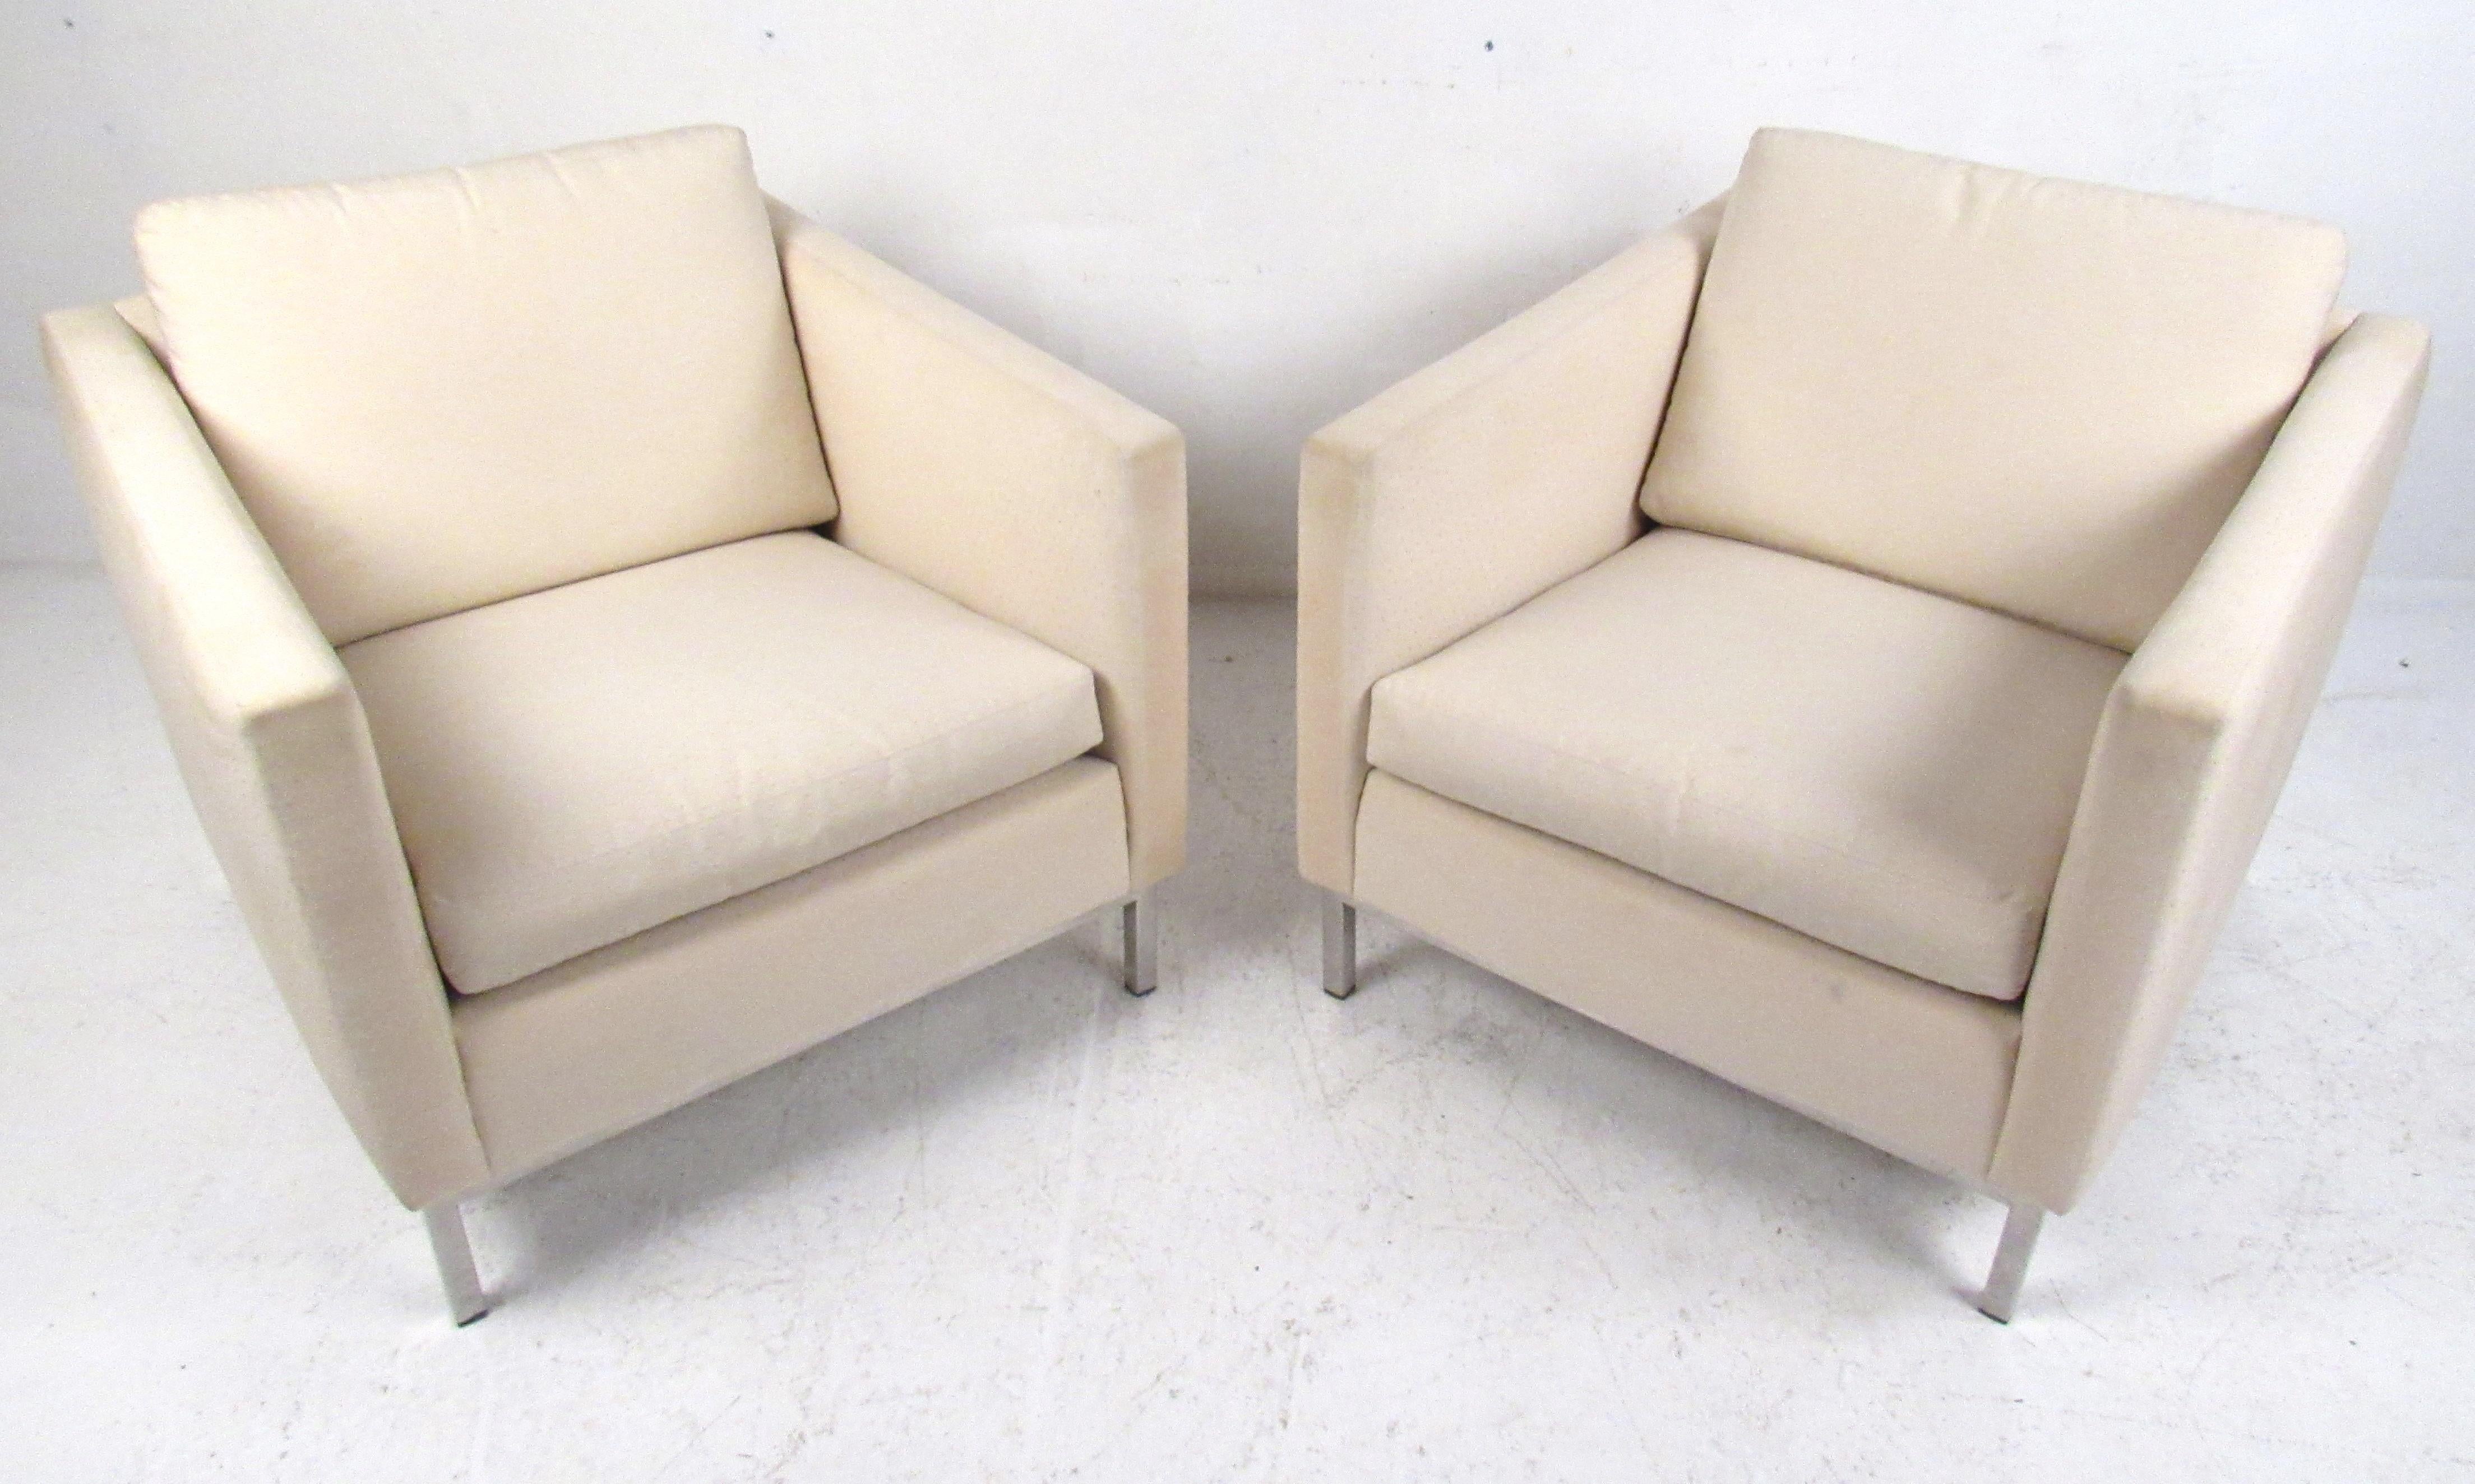 This stunning pair of lounge chairs feature a heavy chrome frame and an overstuffed removable cushion. A sleek and comfortable design that is sure to complement any seating arrangement. Please confirm the item location (NY or NJ).